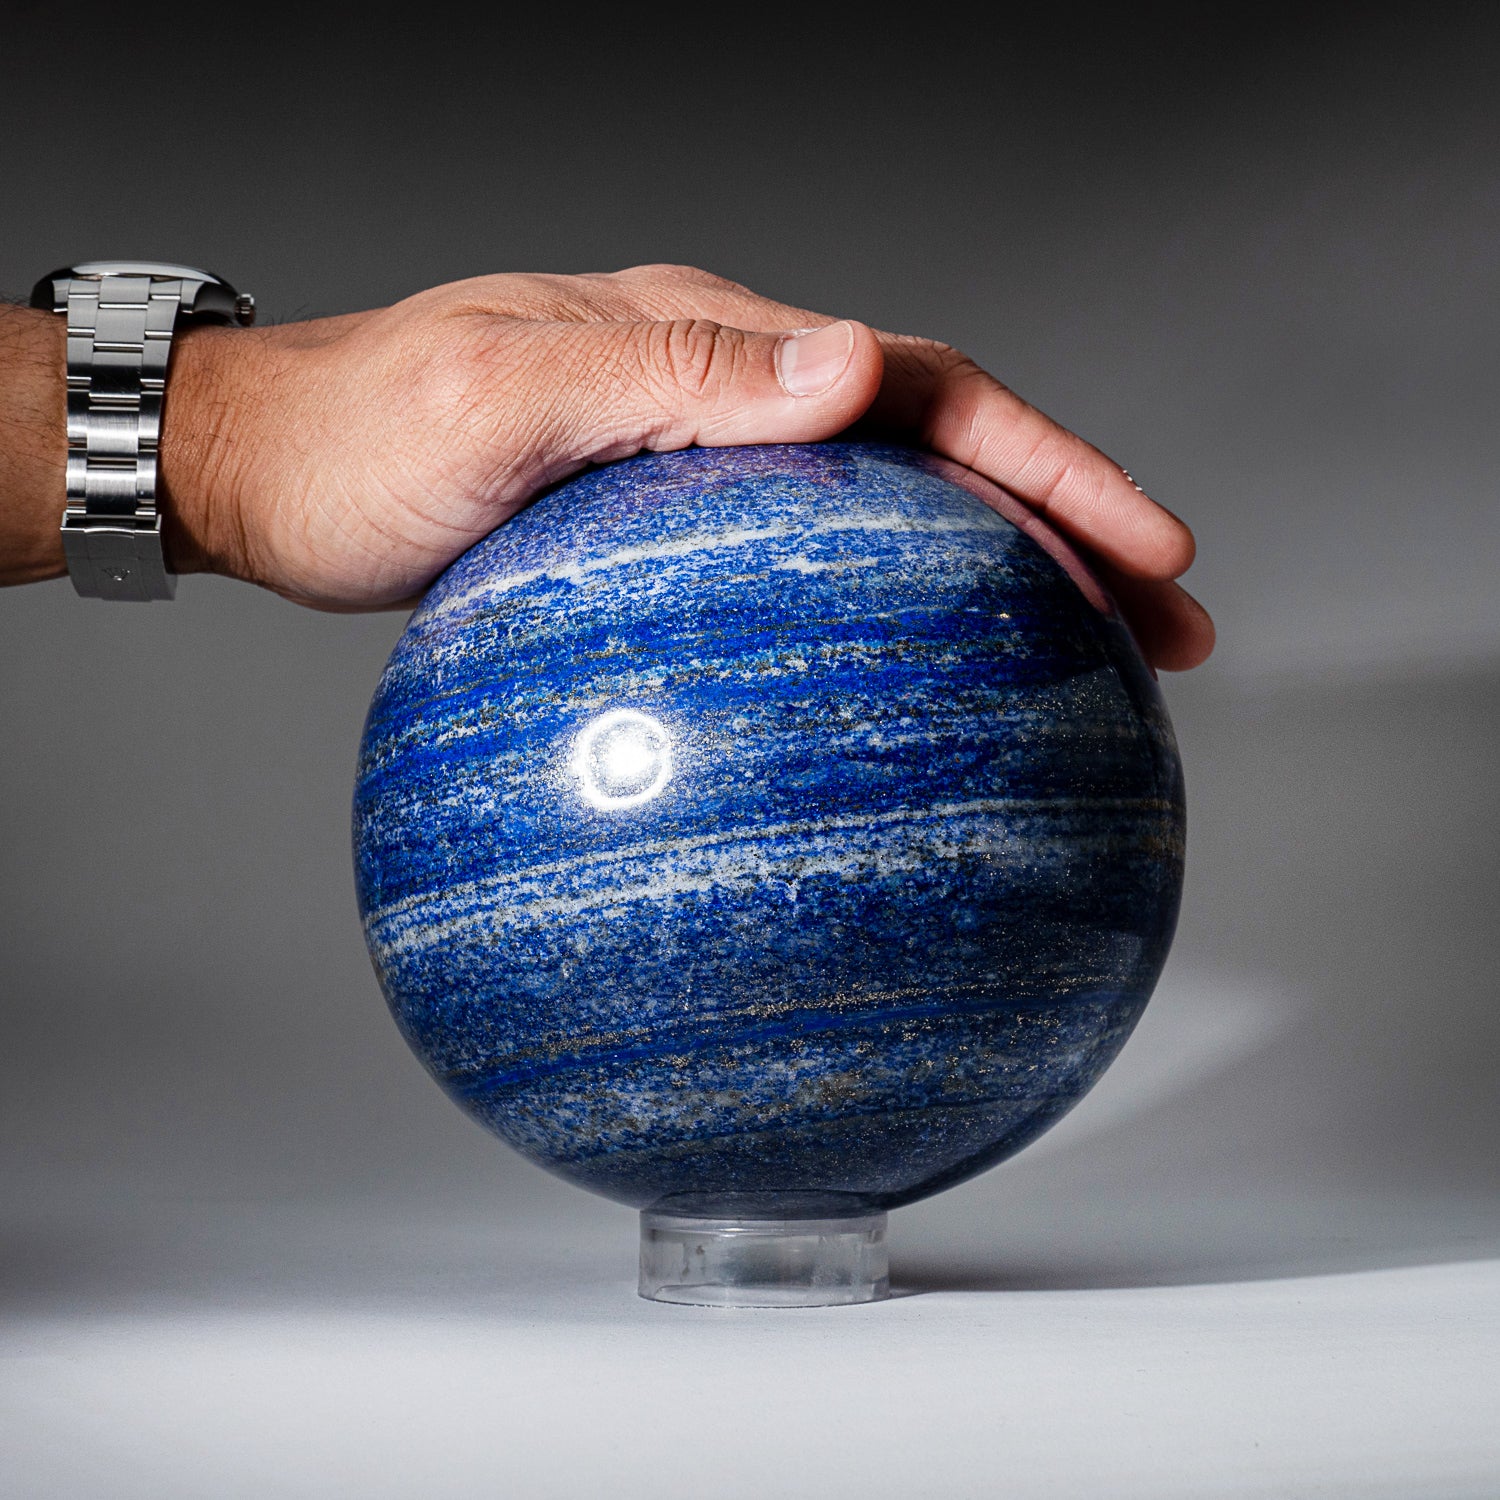 Polished Lapis Lazuli Sphere from Afghanistan (5.5", 11 lbs)